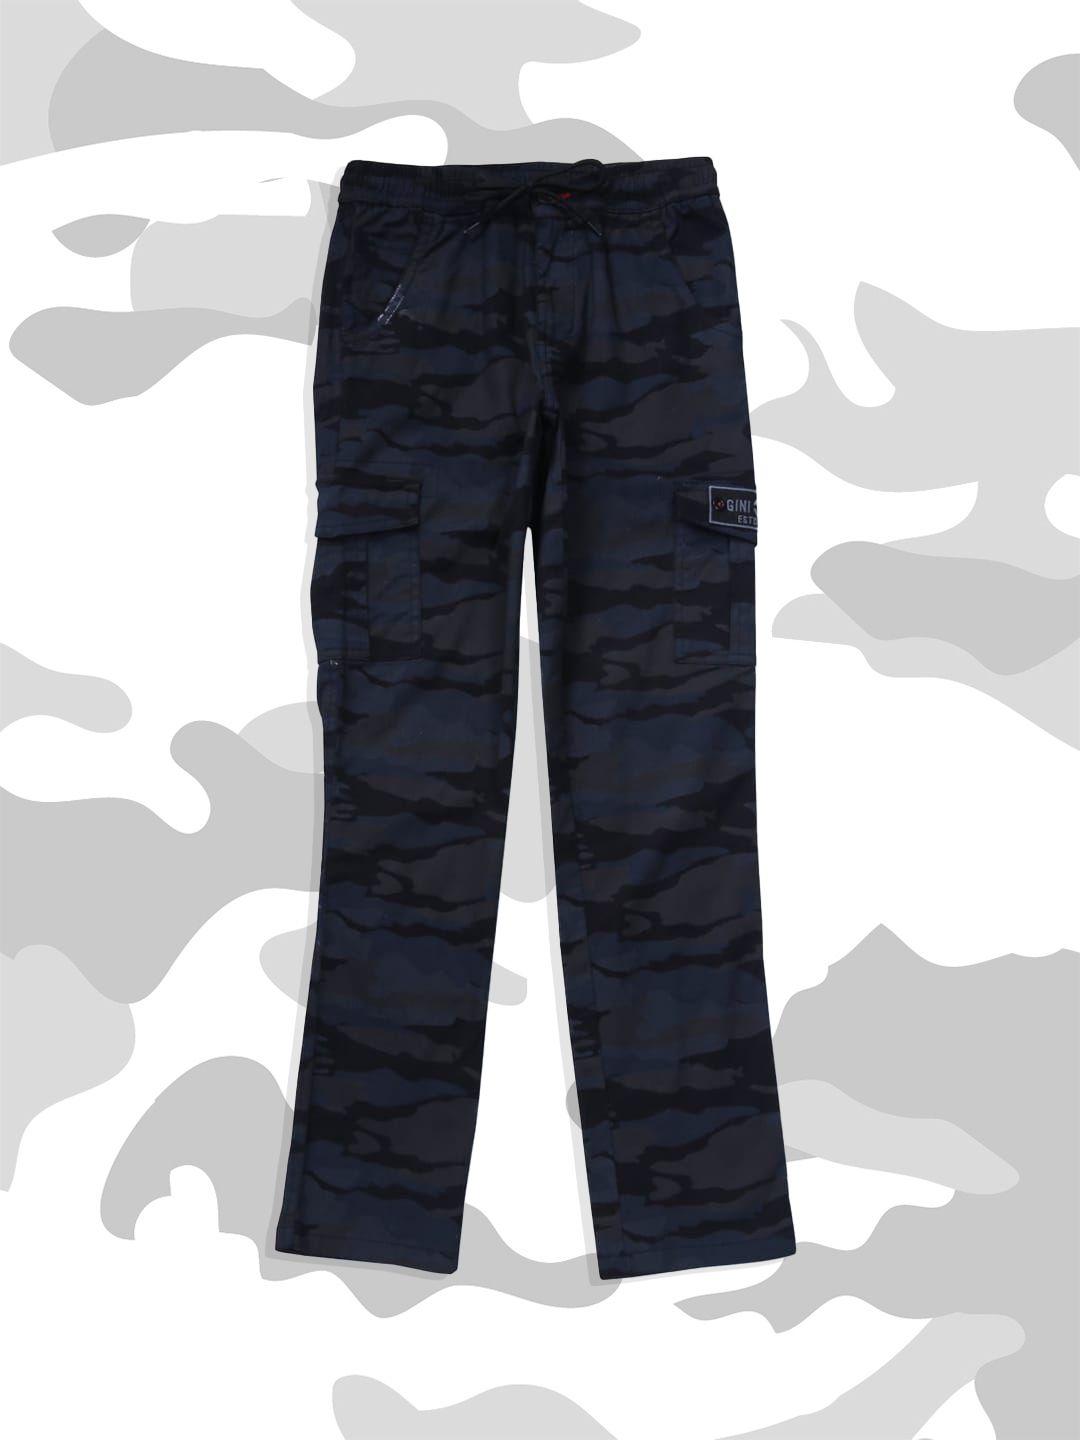 Gini and Jony Boys Blue Camouflage Printed Cargos Trousers